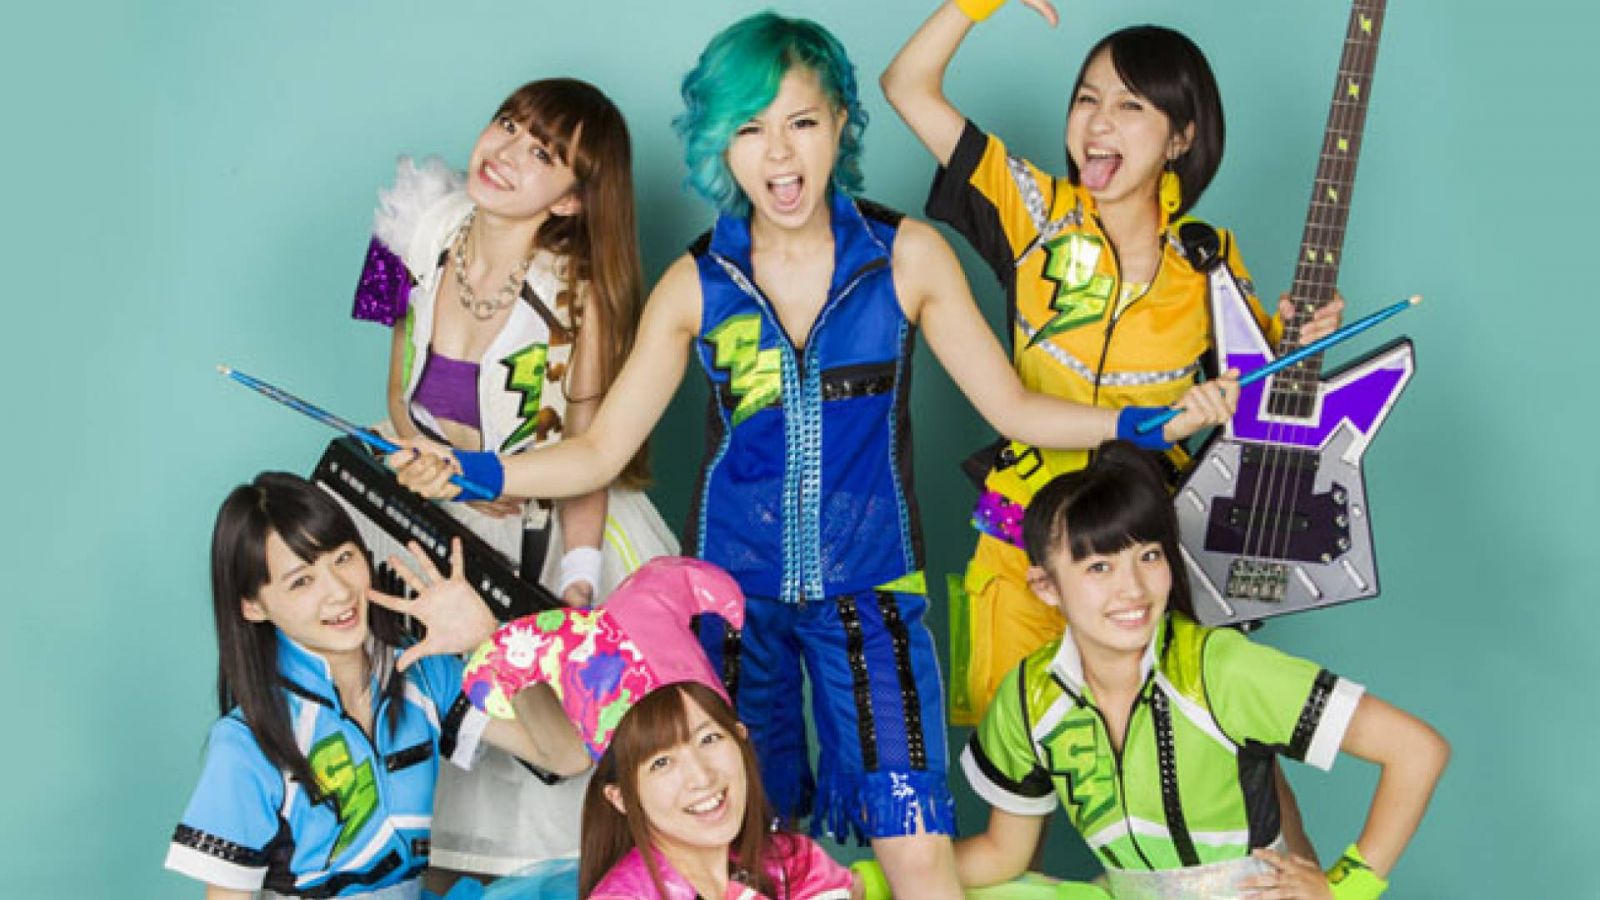 Interview with Gacharic Spin © Gacharic Spin